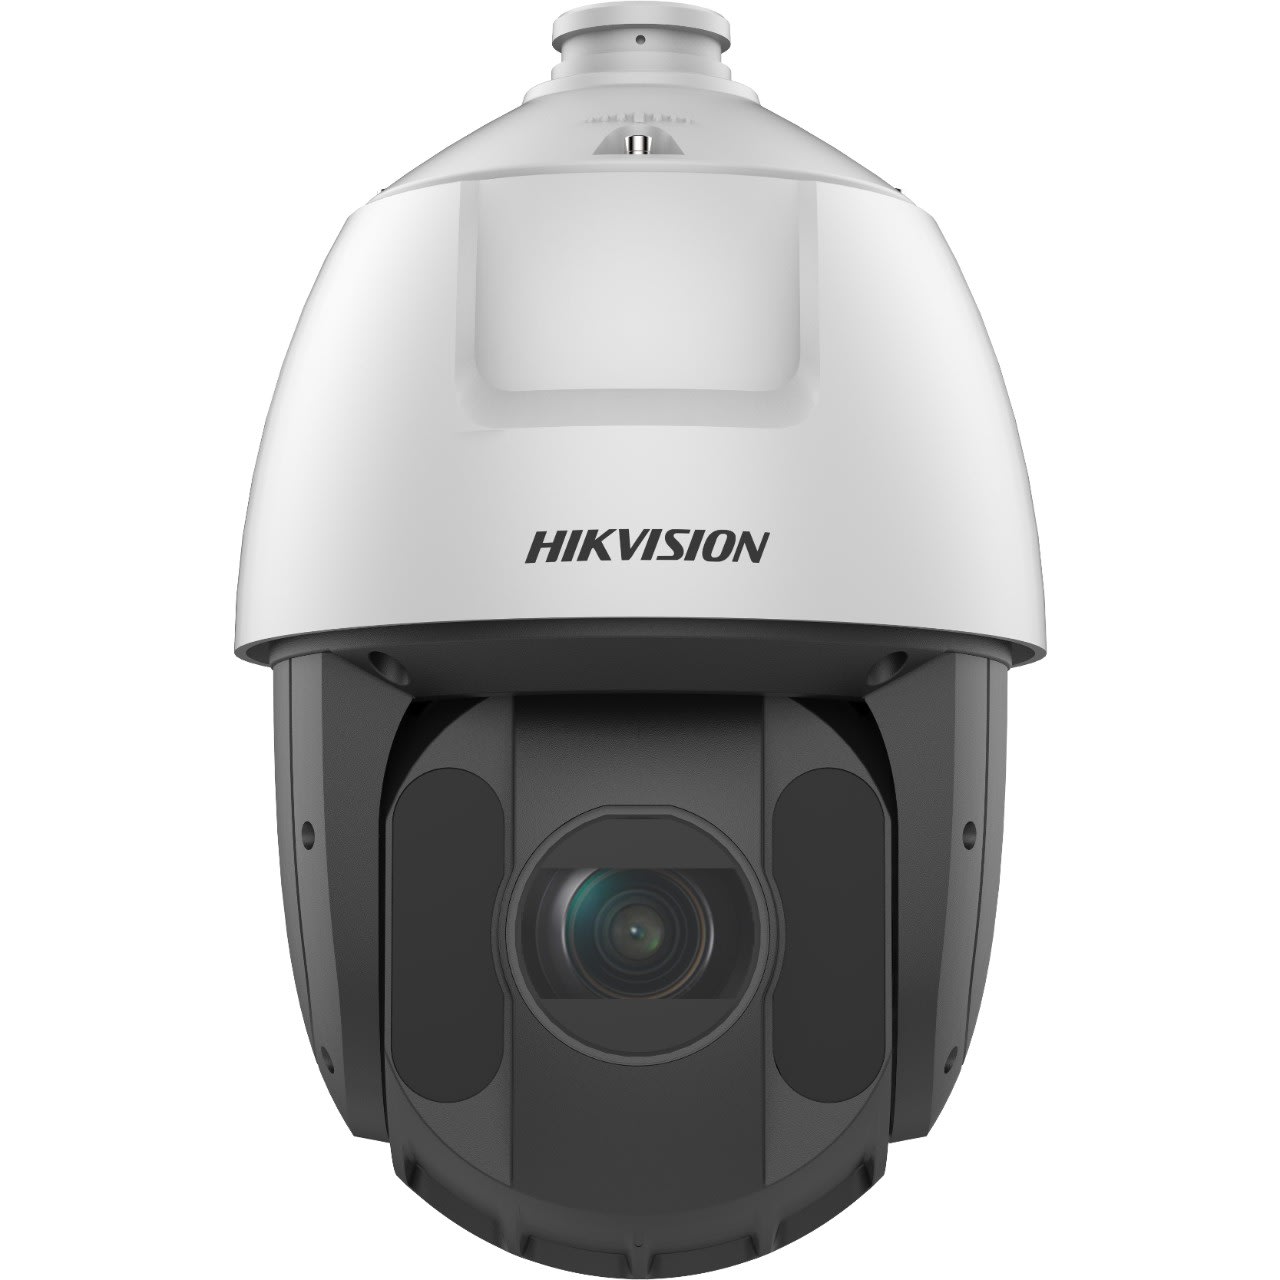 Hikvision - Camera IP Dome 4MP VF 4.8 mm to 120 mm, IP66, IR 150m, WDR 120dB